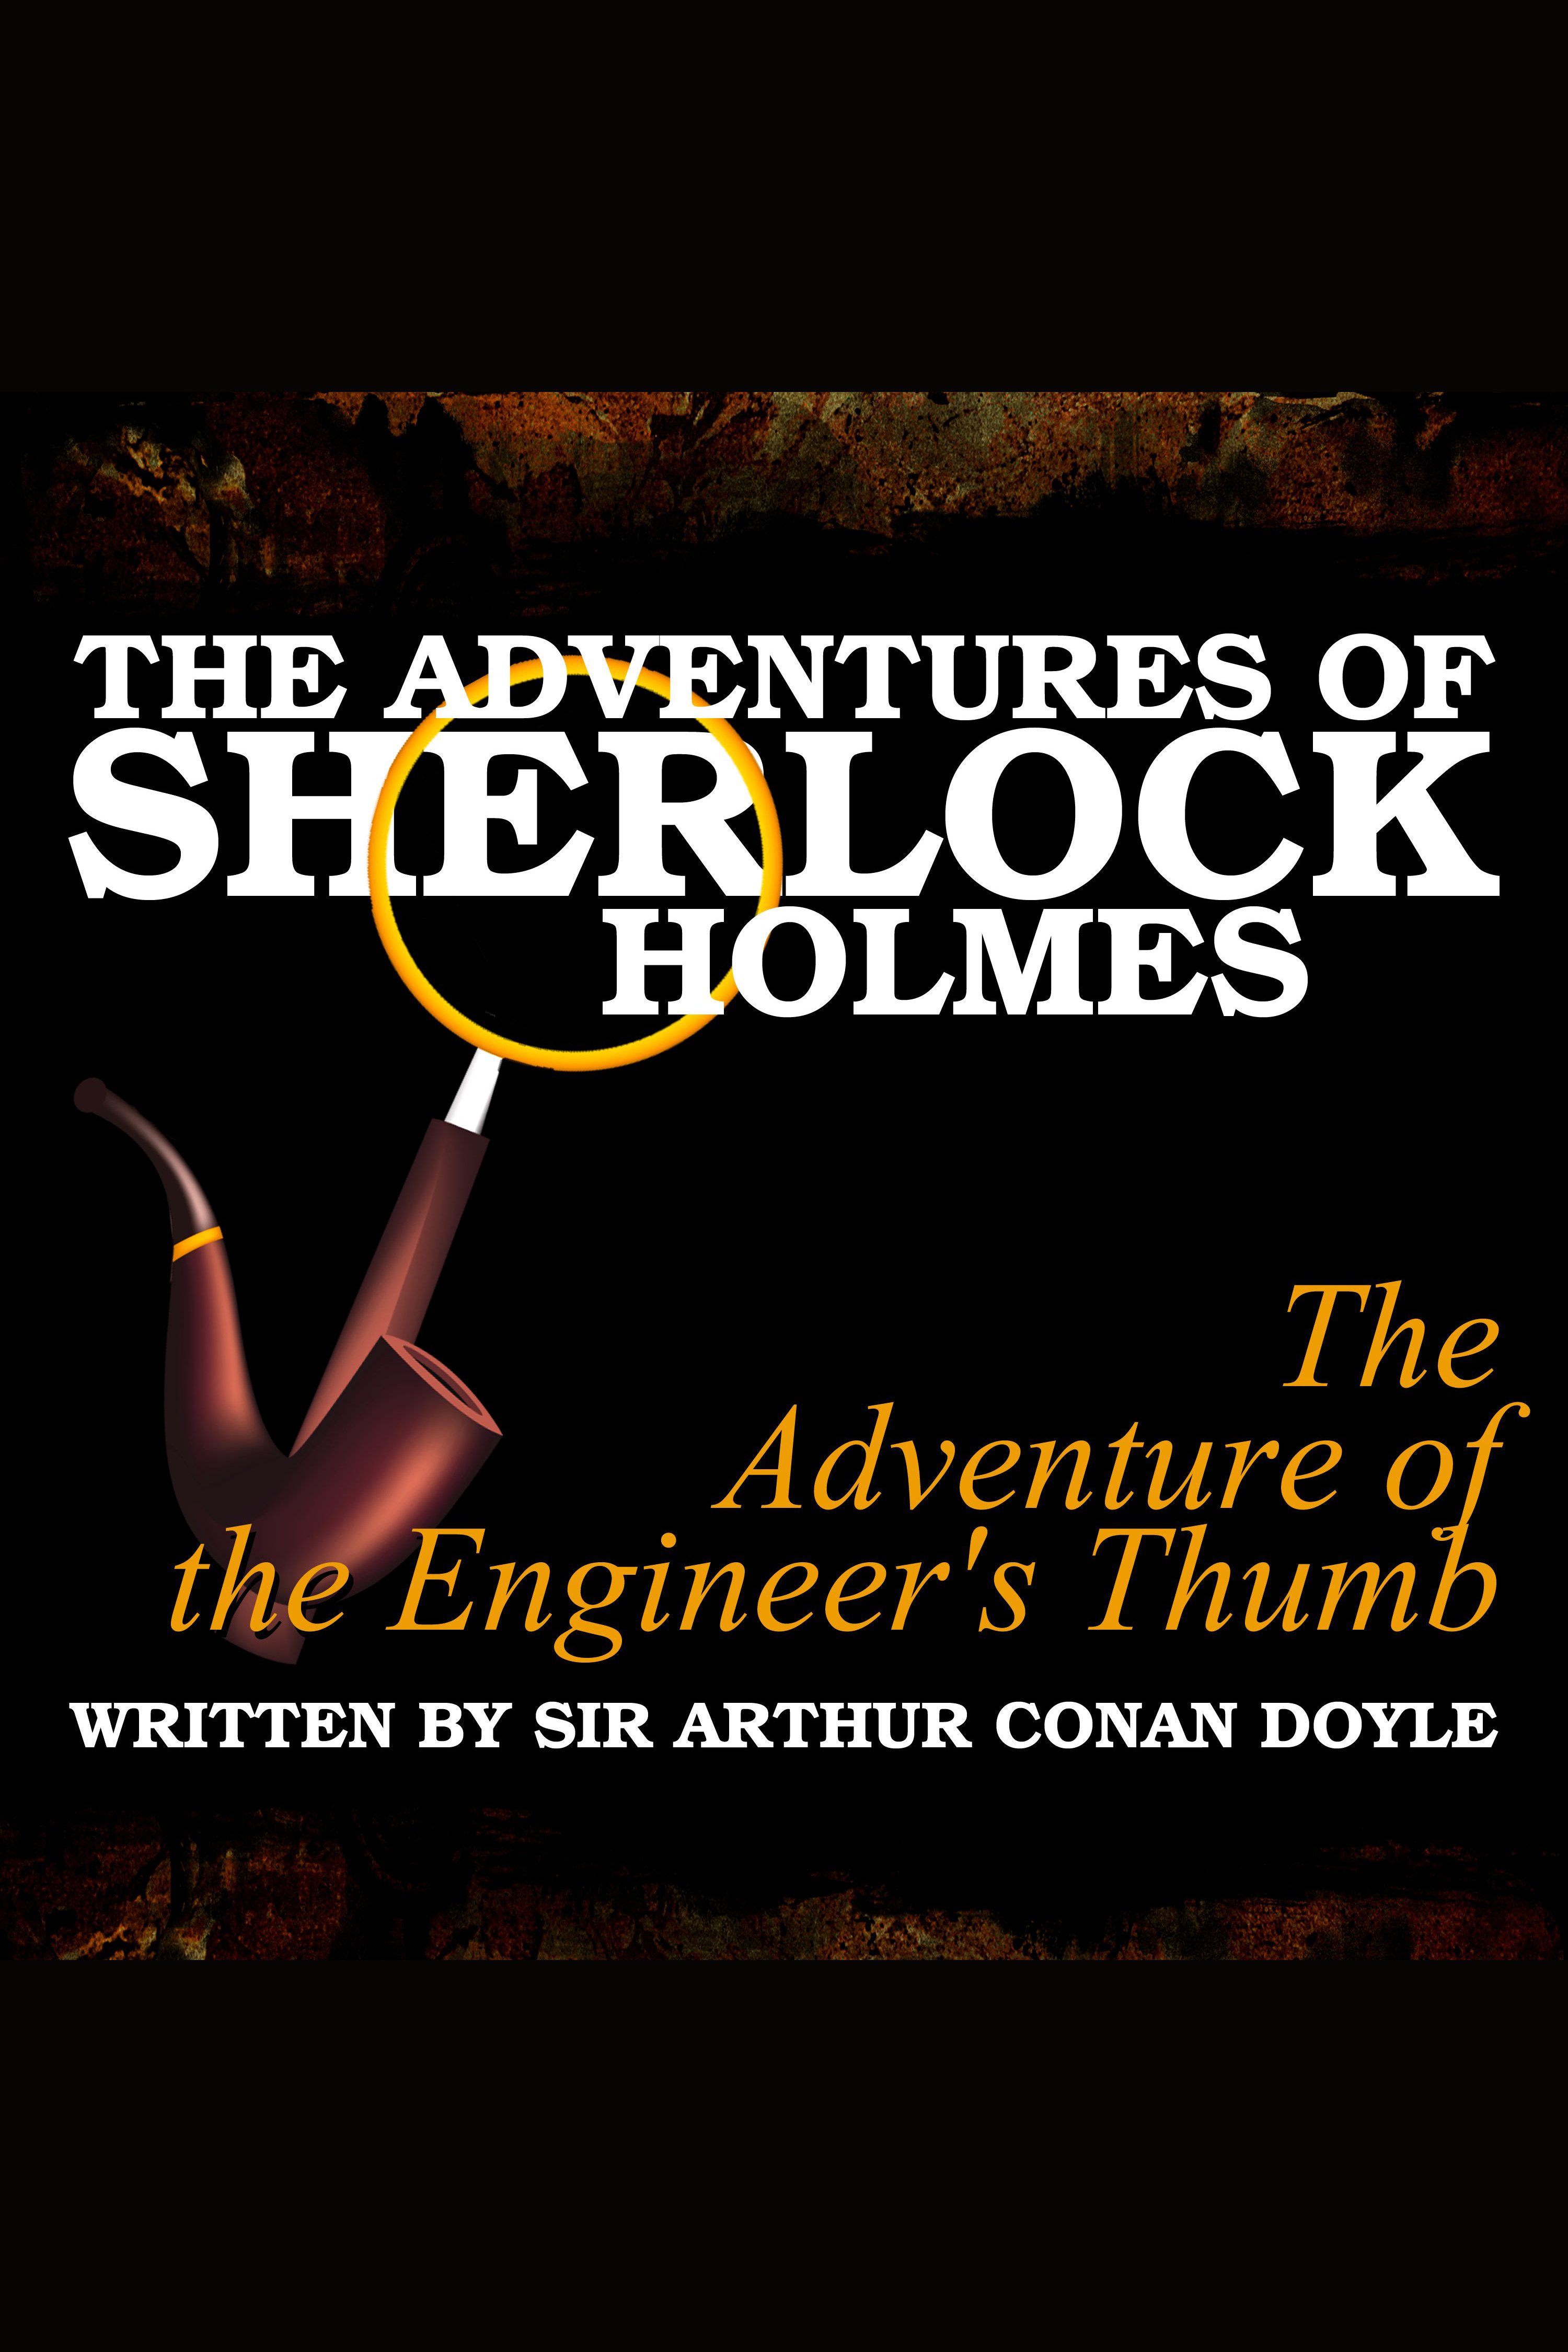 The Adventures of Sherlock Holmes - The Man with the Twisted Lip cover image